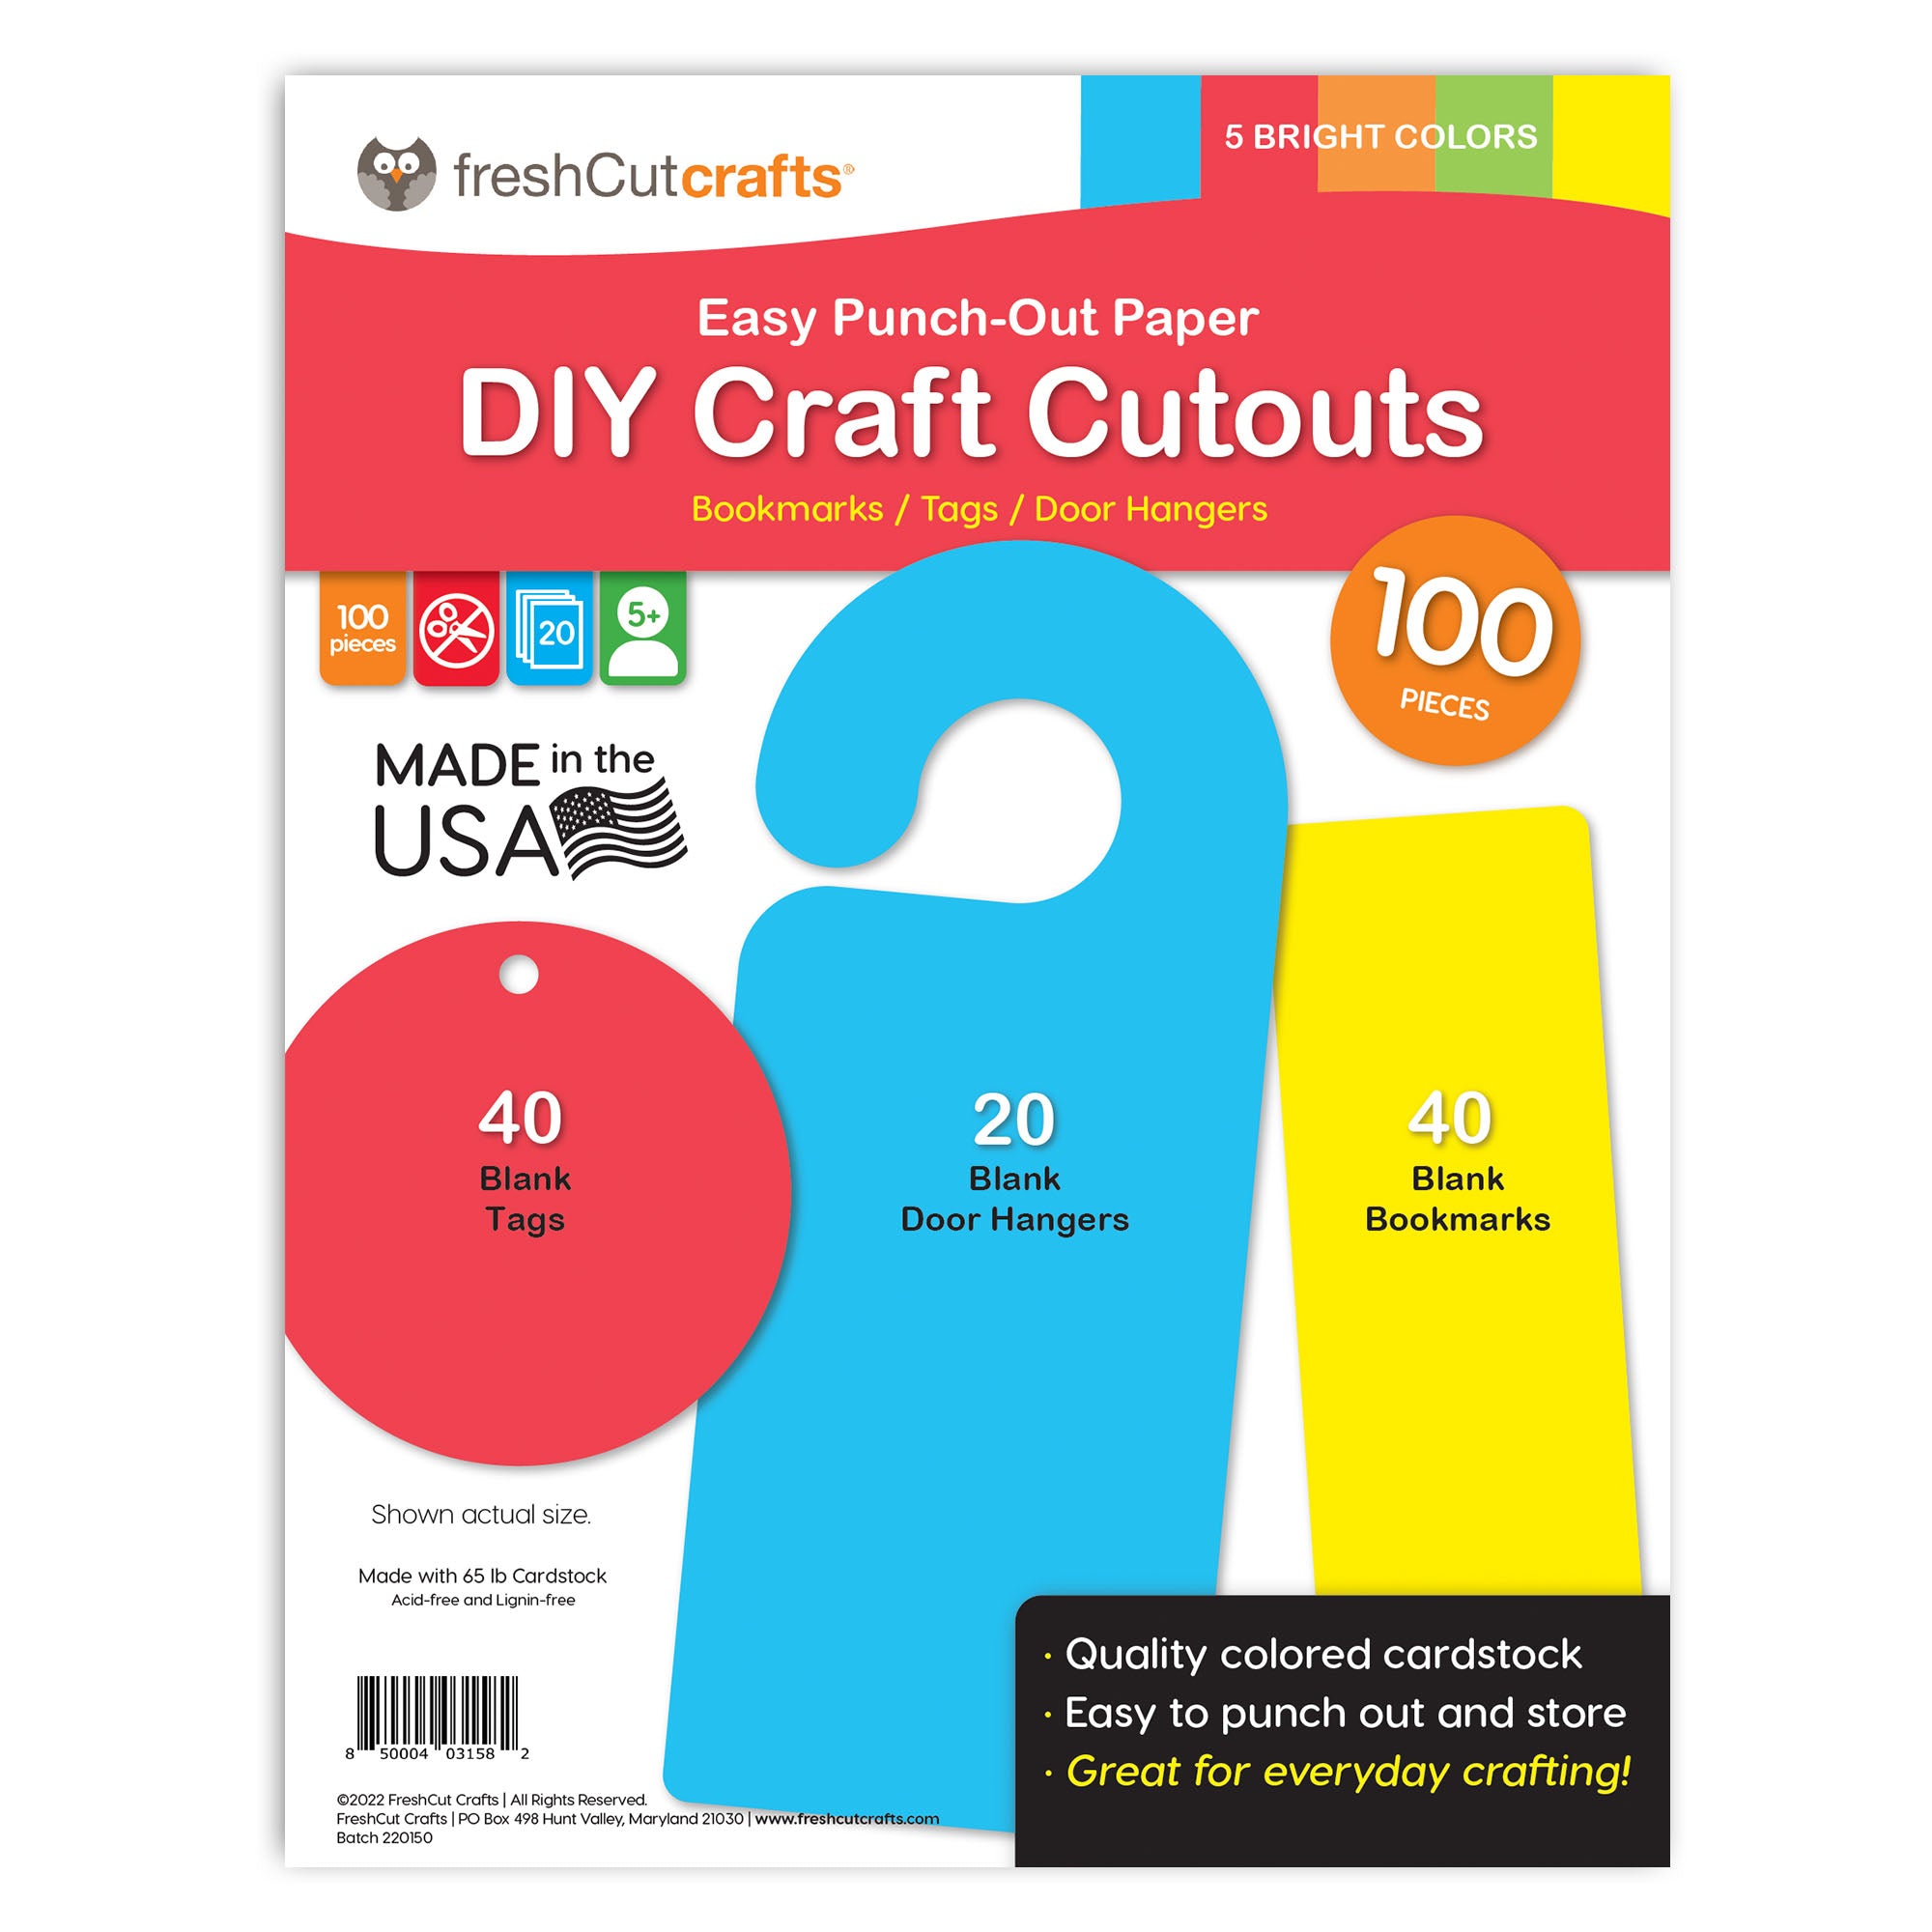 FreshCut Crafts | DIY Craft Cutouts 100 Pcs Blank Bookmarks, Door Hangers, Gift Tags, Bright Colors, US Made Card Stock Punch Out Paper Craft Cutouts